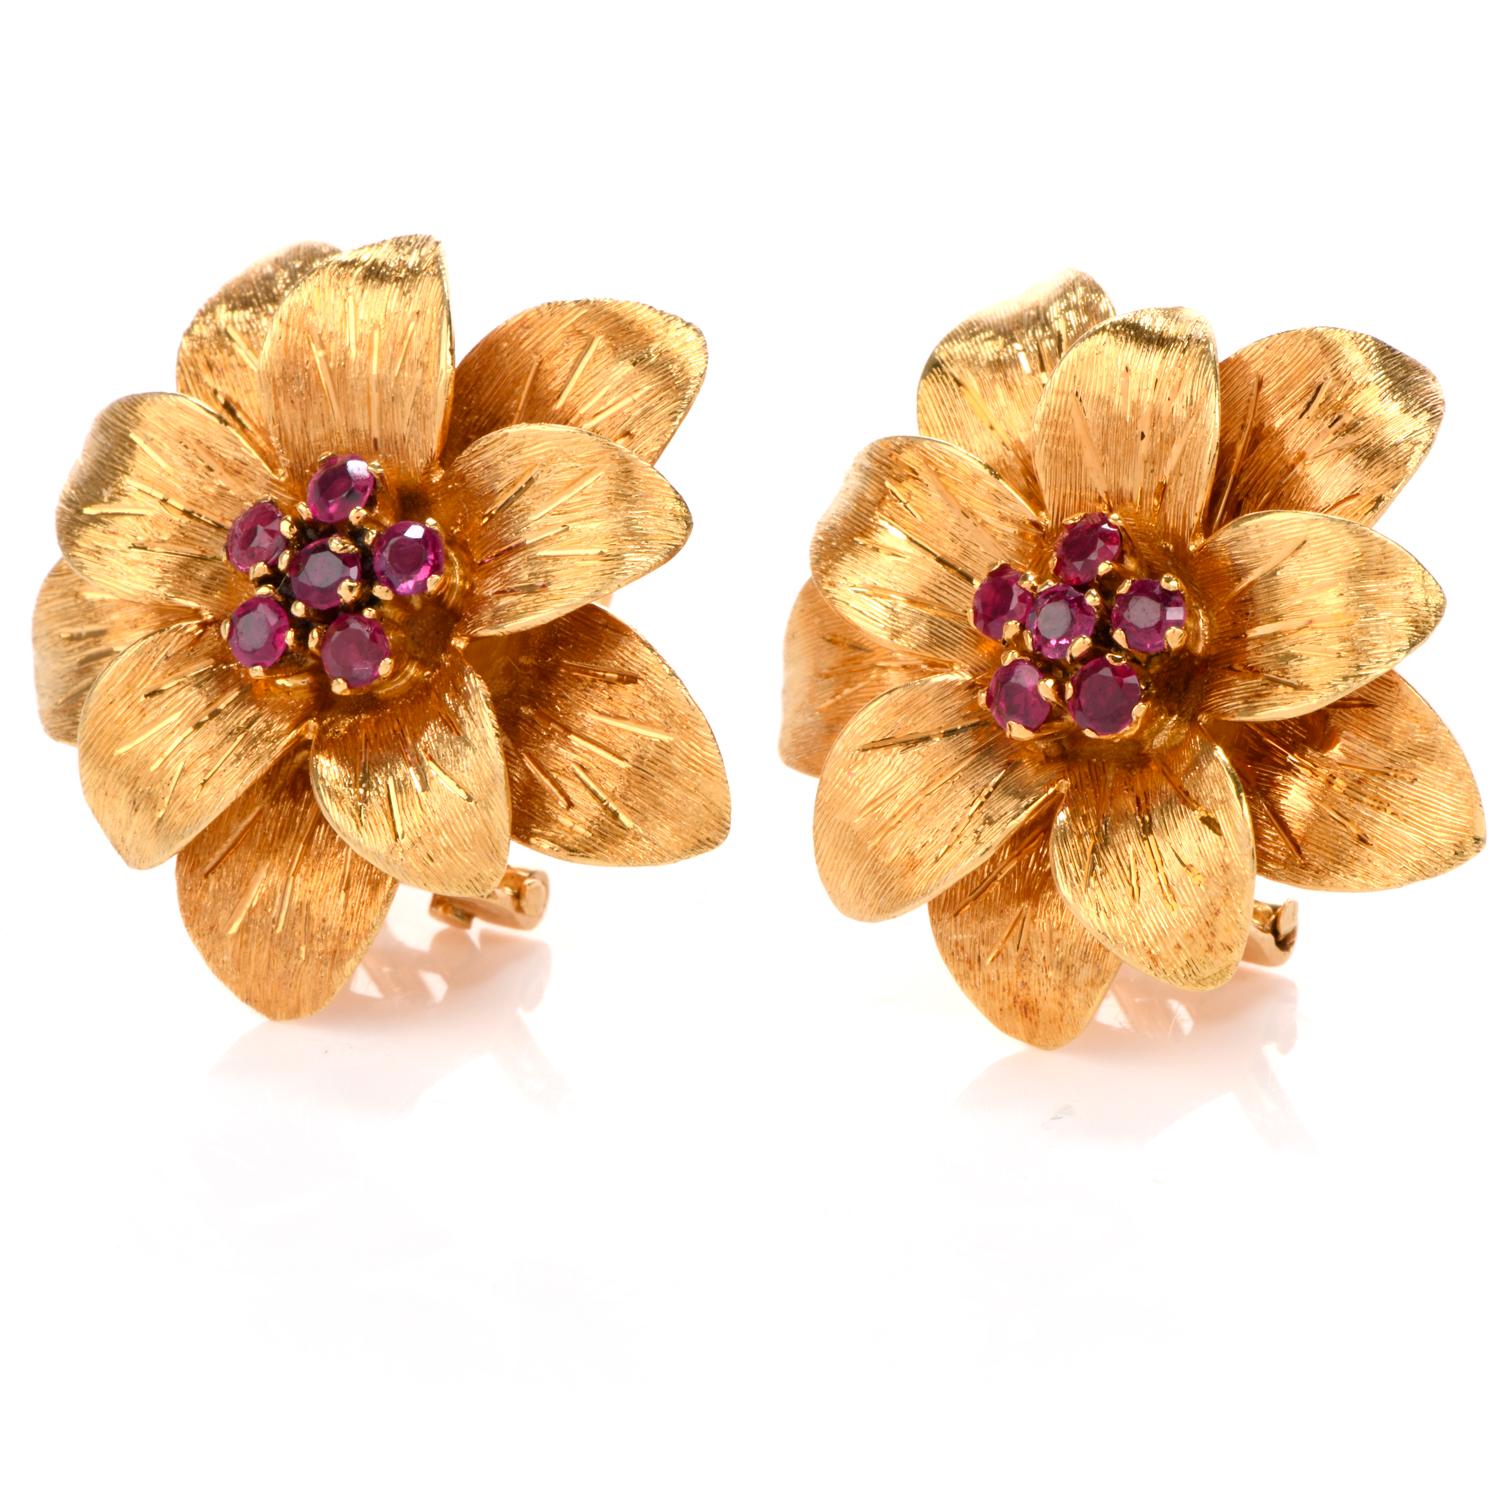 These classically beautiful designer Tiffany & Co. earrings were crafted circa 1950 in 18-karat yellow gold, weighing 12.0 grams and measuring 23mm. Simulating flowers with curved petals. Showcasing a clustered center of 12 prong-set, round-cut red